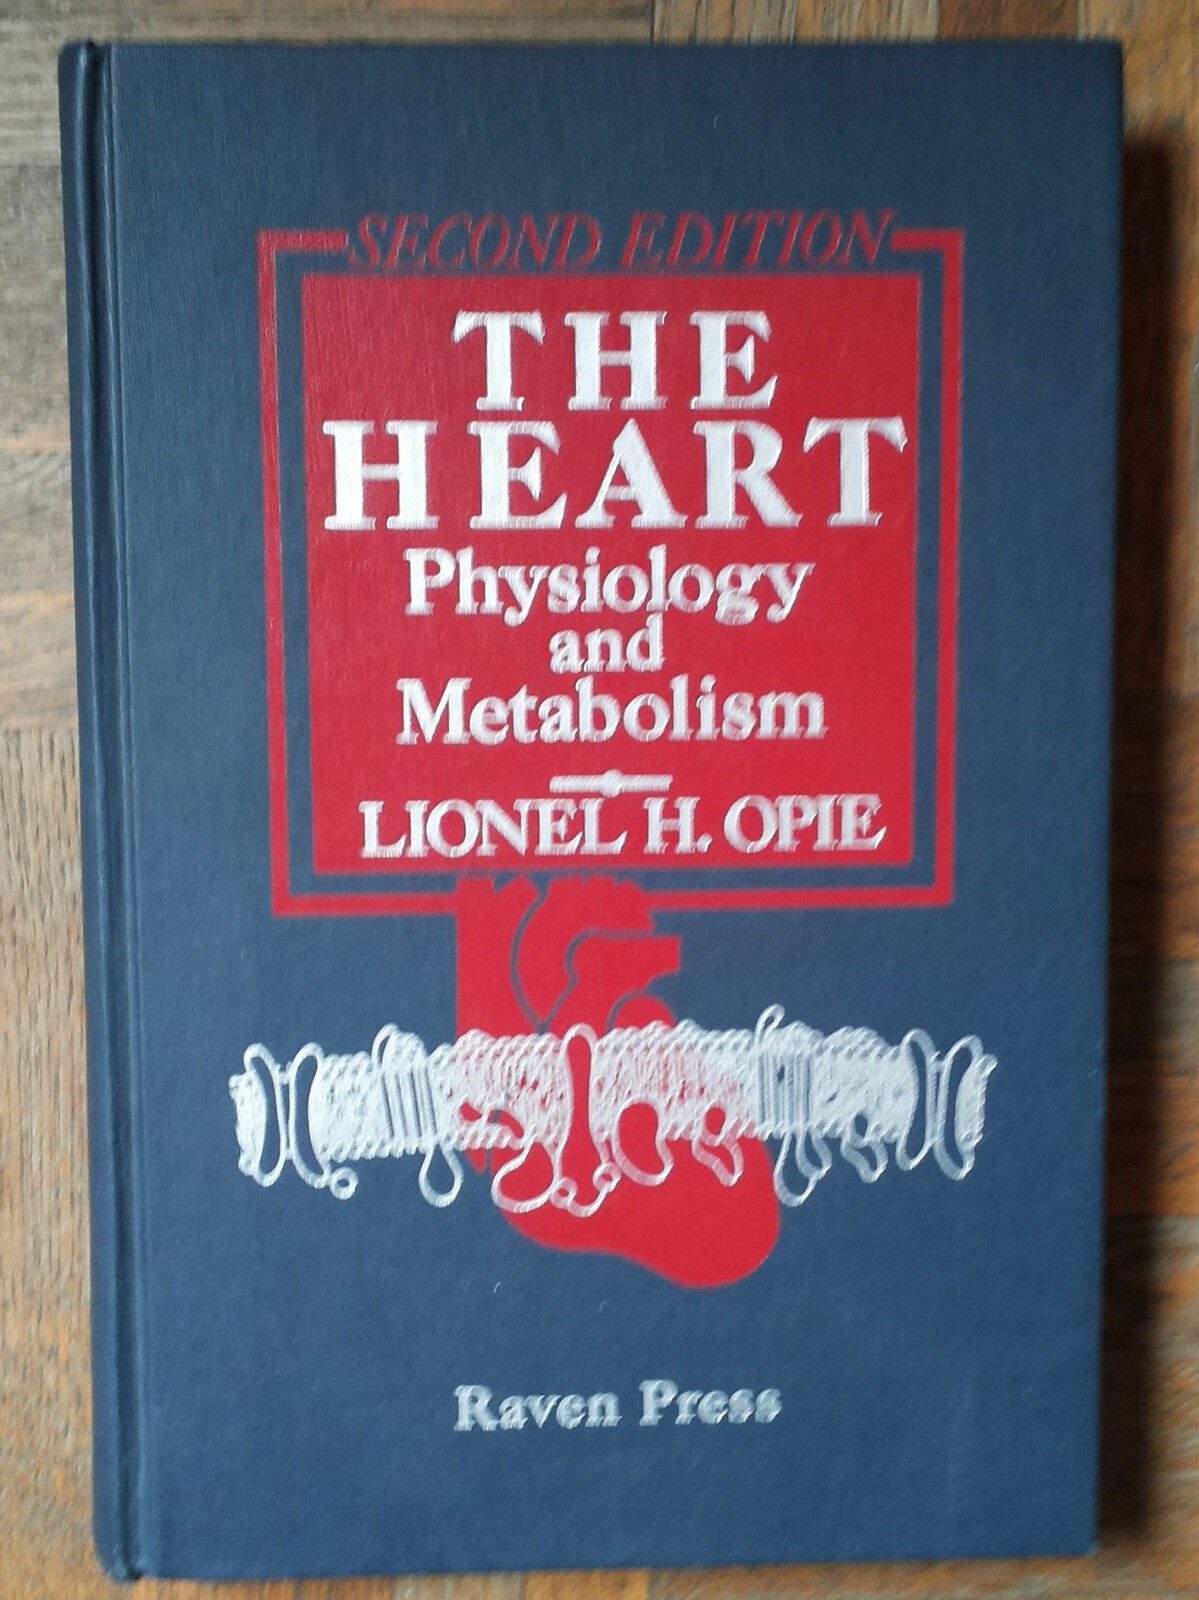 The Heart Physiology and Metabolism - Hopie - Raven Press,1991 - R